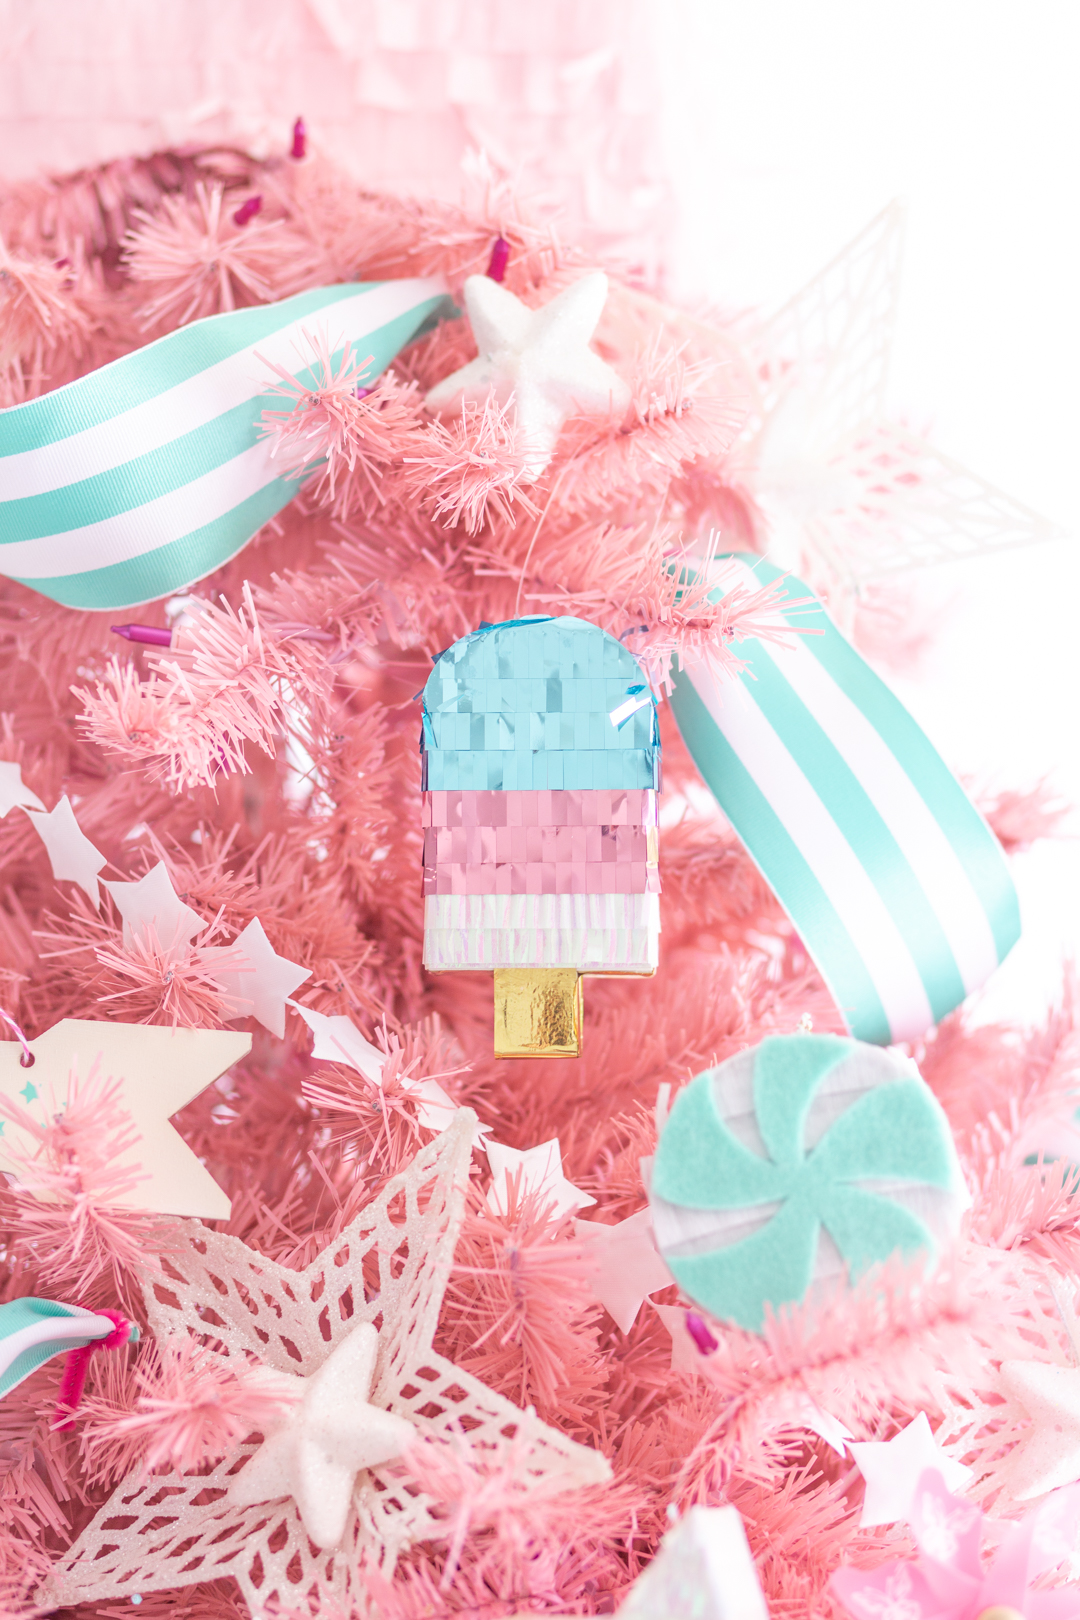 summer christmas tree with stars and stripes and mini popsicle pinata decorations